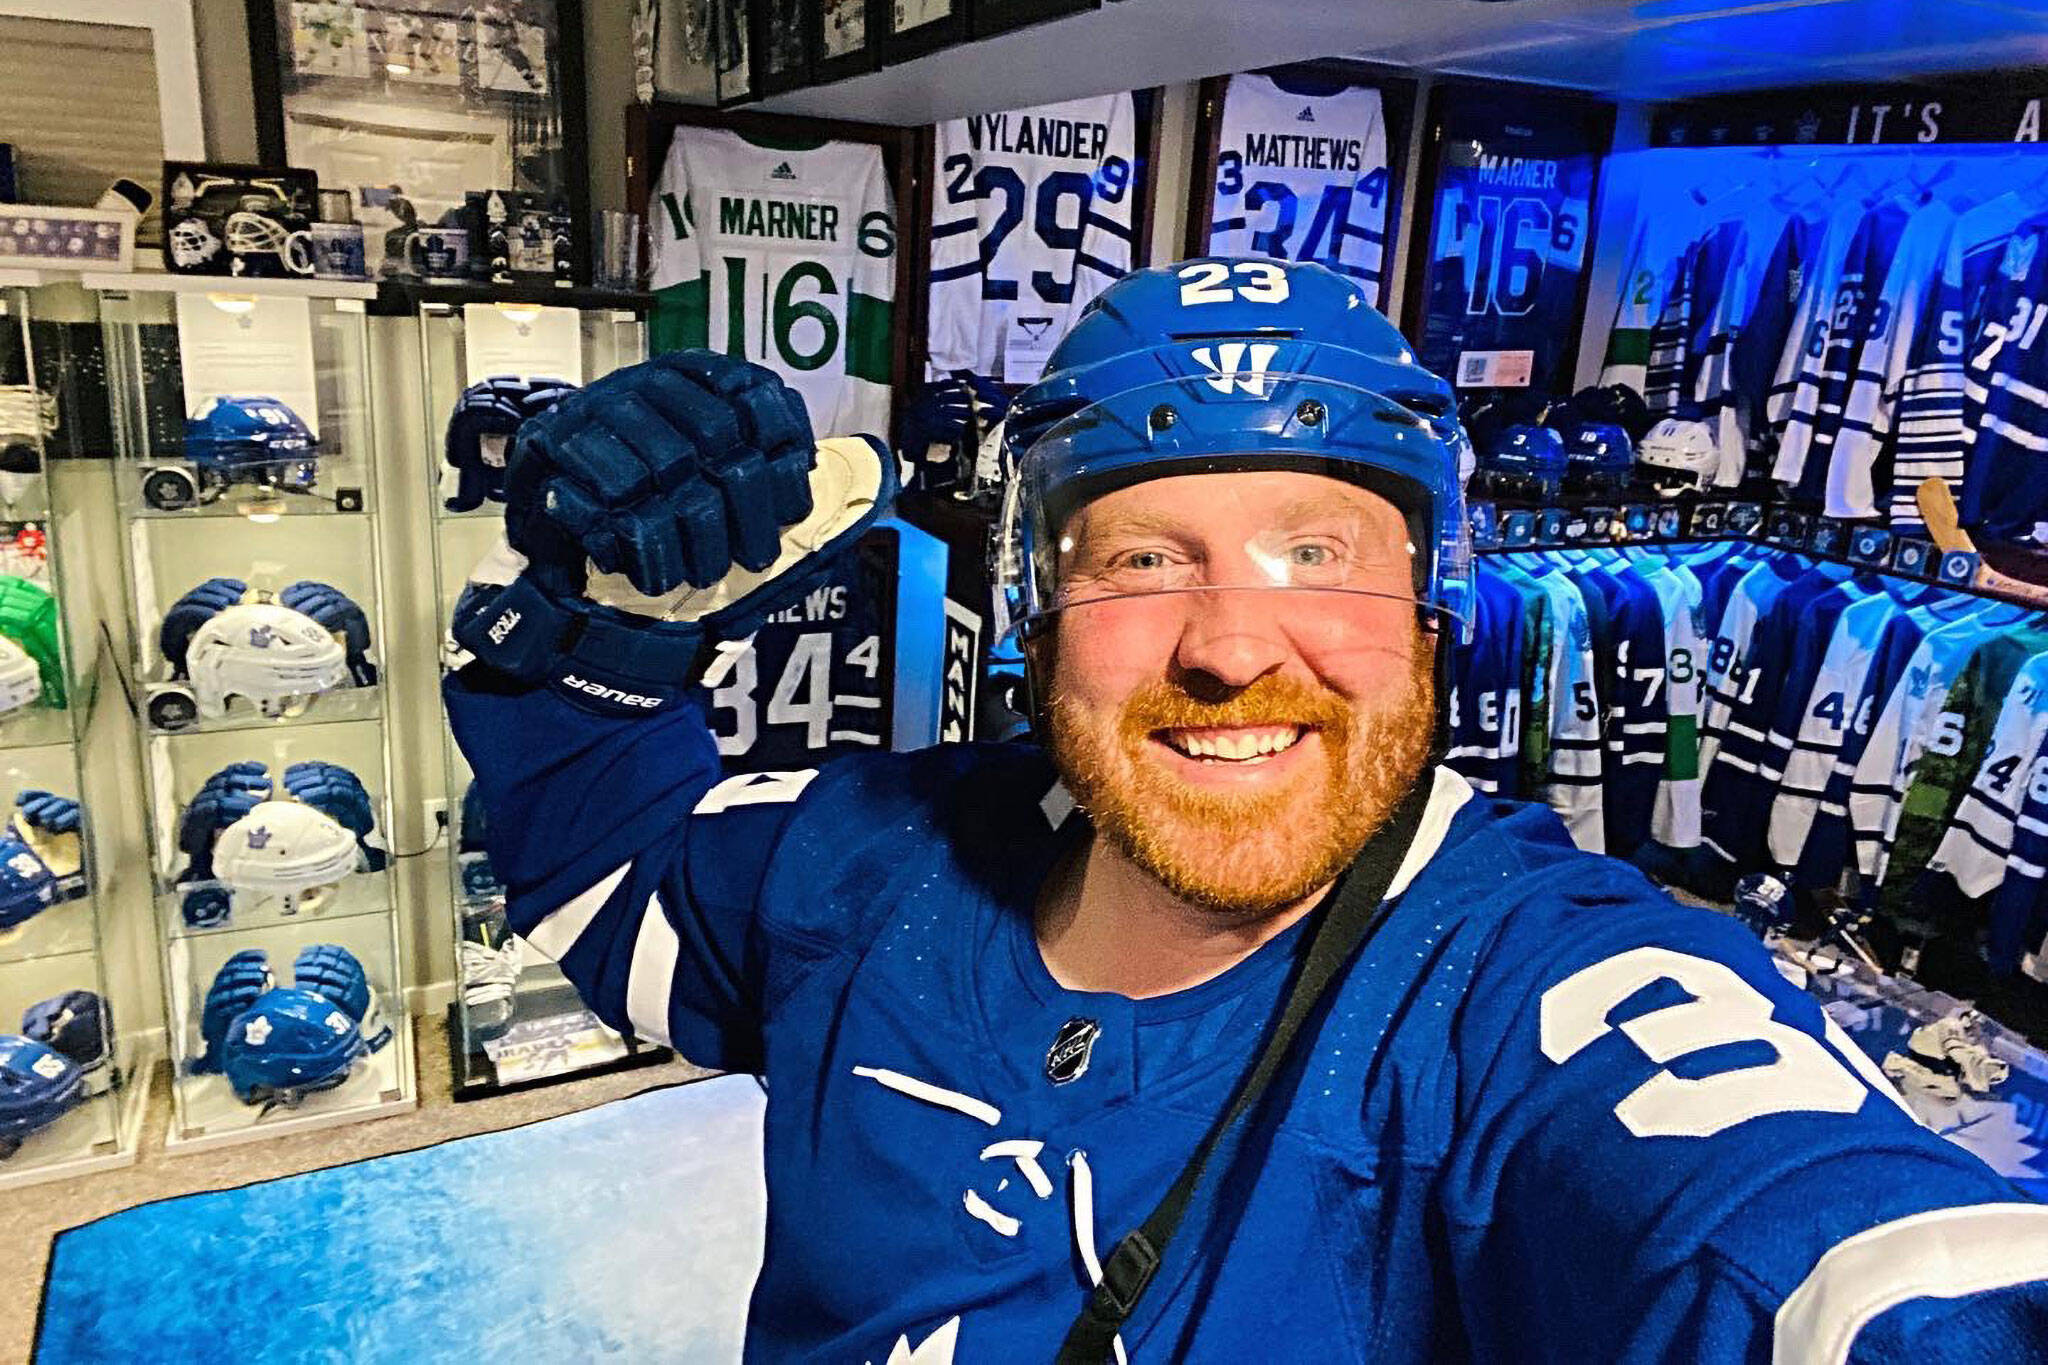 Toronto Maple Leafs' superfan collects years worth of memorabilia 